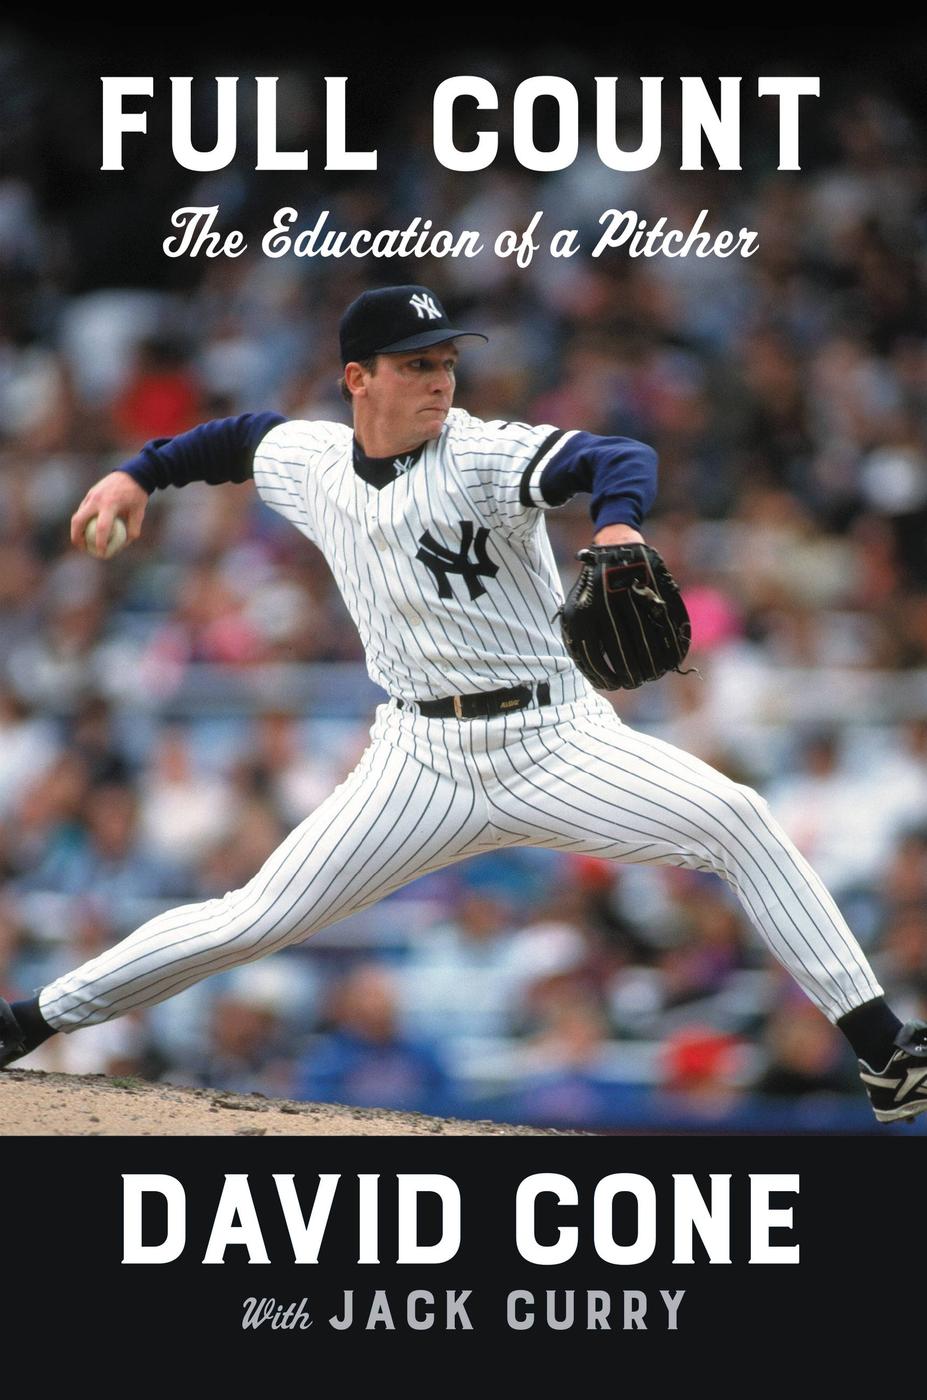 Copyright 2019 by David Cone and Jack Curry Cover design by Flag Cover - photo 1